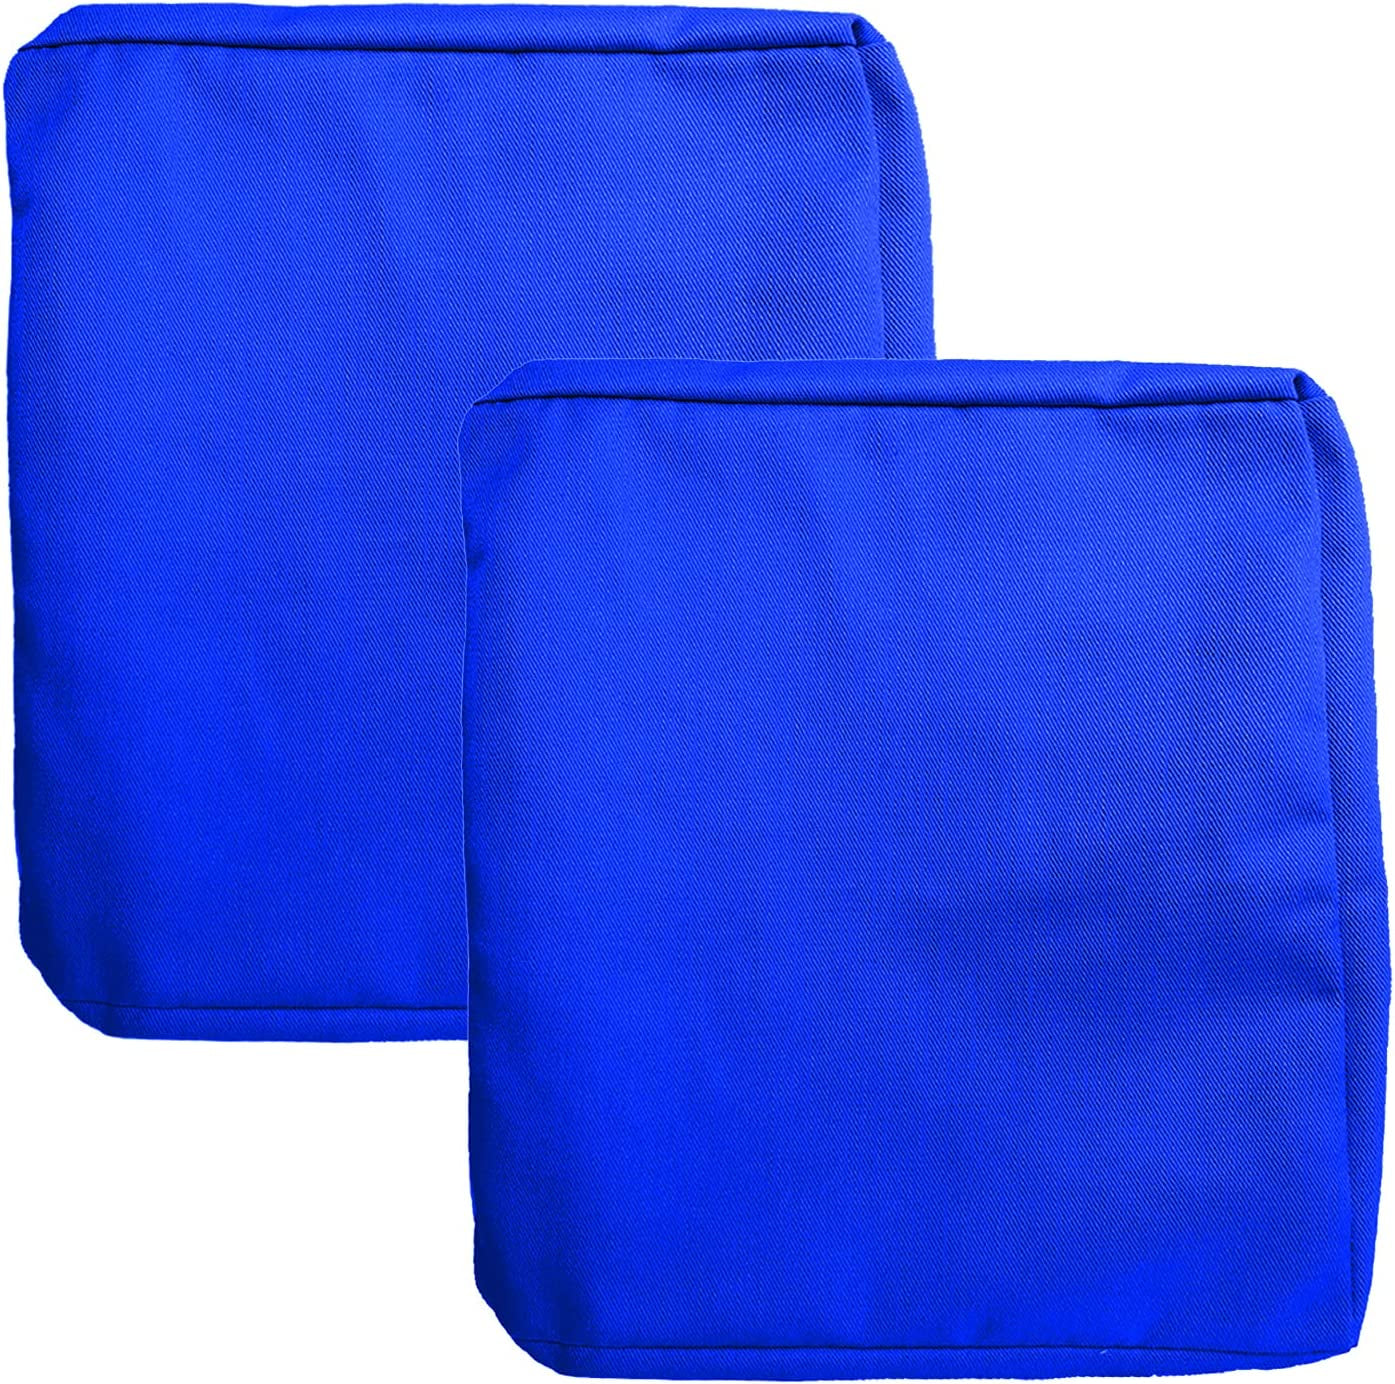 FLYMEI, FLYMEI Outdoor Cushion Cover Replacement, Patio Cushion Slip Covers Patio Chair Seat Cushion Covers Only, Water Resistant Patio Cushion Cover (22'' X 22'' X 4'' 2Pack, Royal Blue)